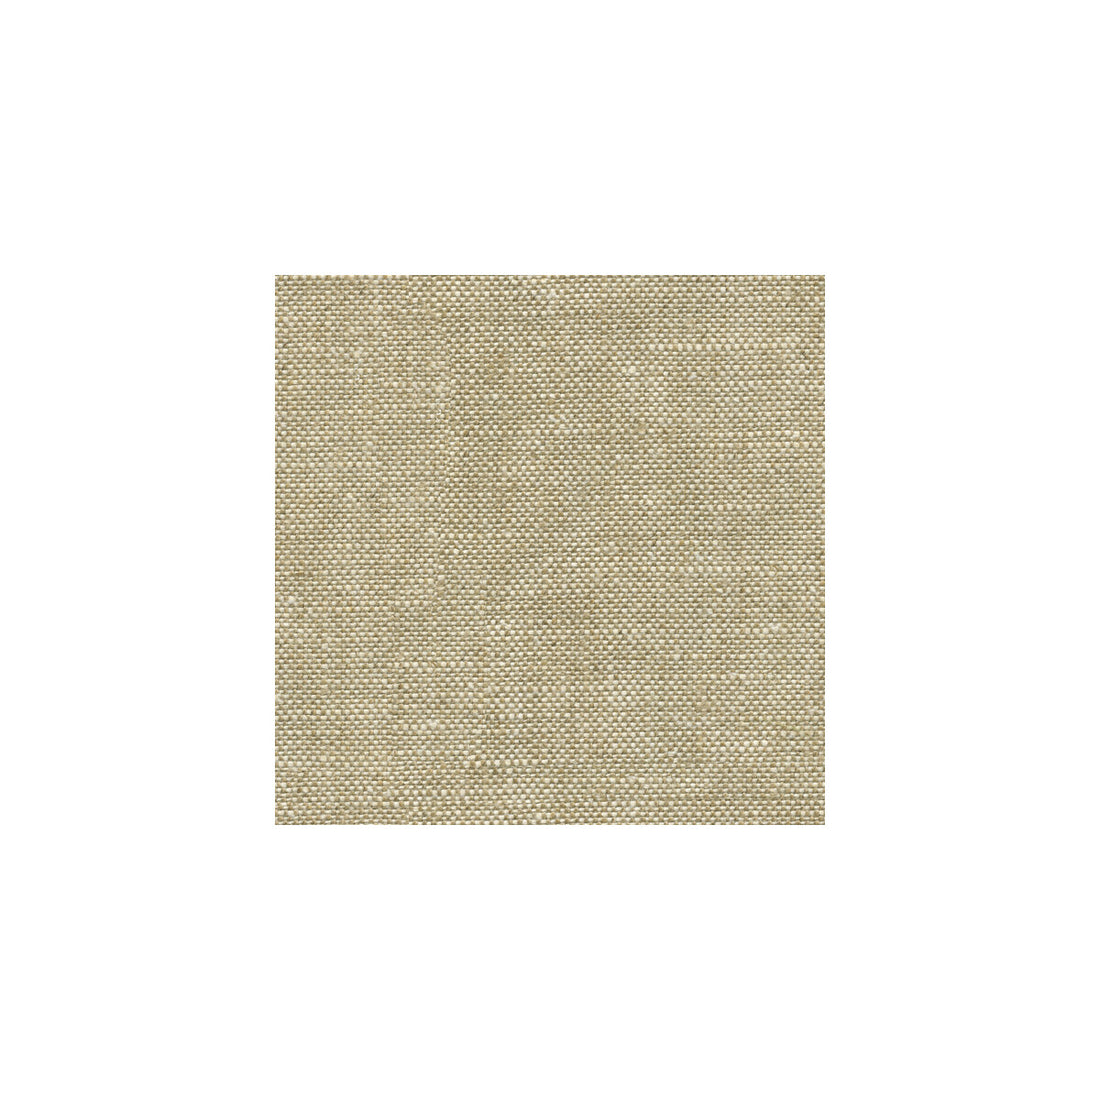 Madison Linen fabric in natural color - pattern 32330.16.0 - by Kravet Design in the Gis collection